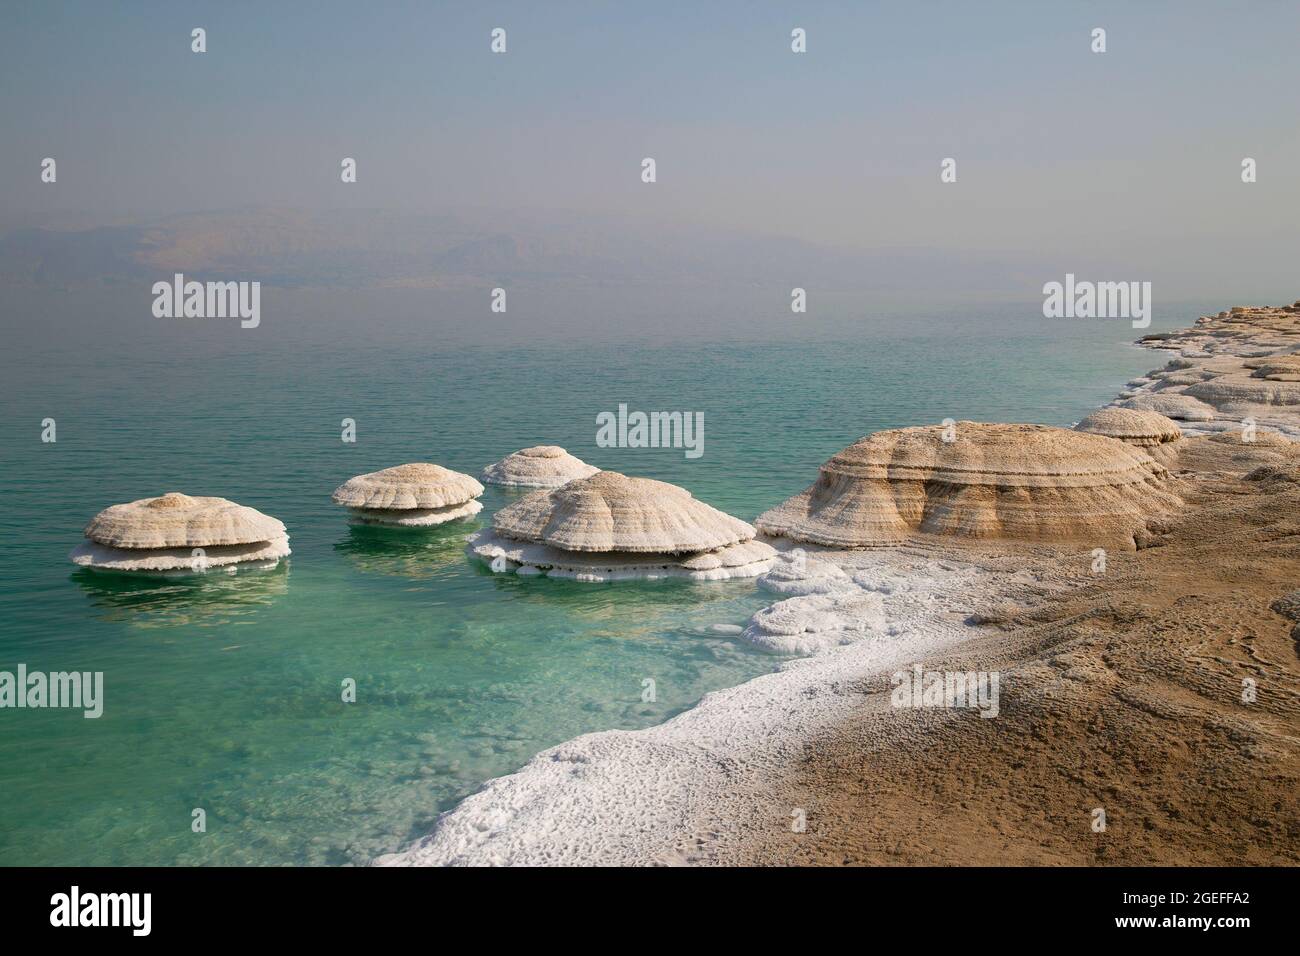 Salt chimneys on the Dead Sea coastline. They form where fresh water flows into the saline lake water and are exposed as water levels drop, Israel Stock Photo